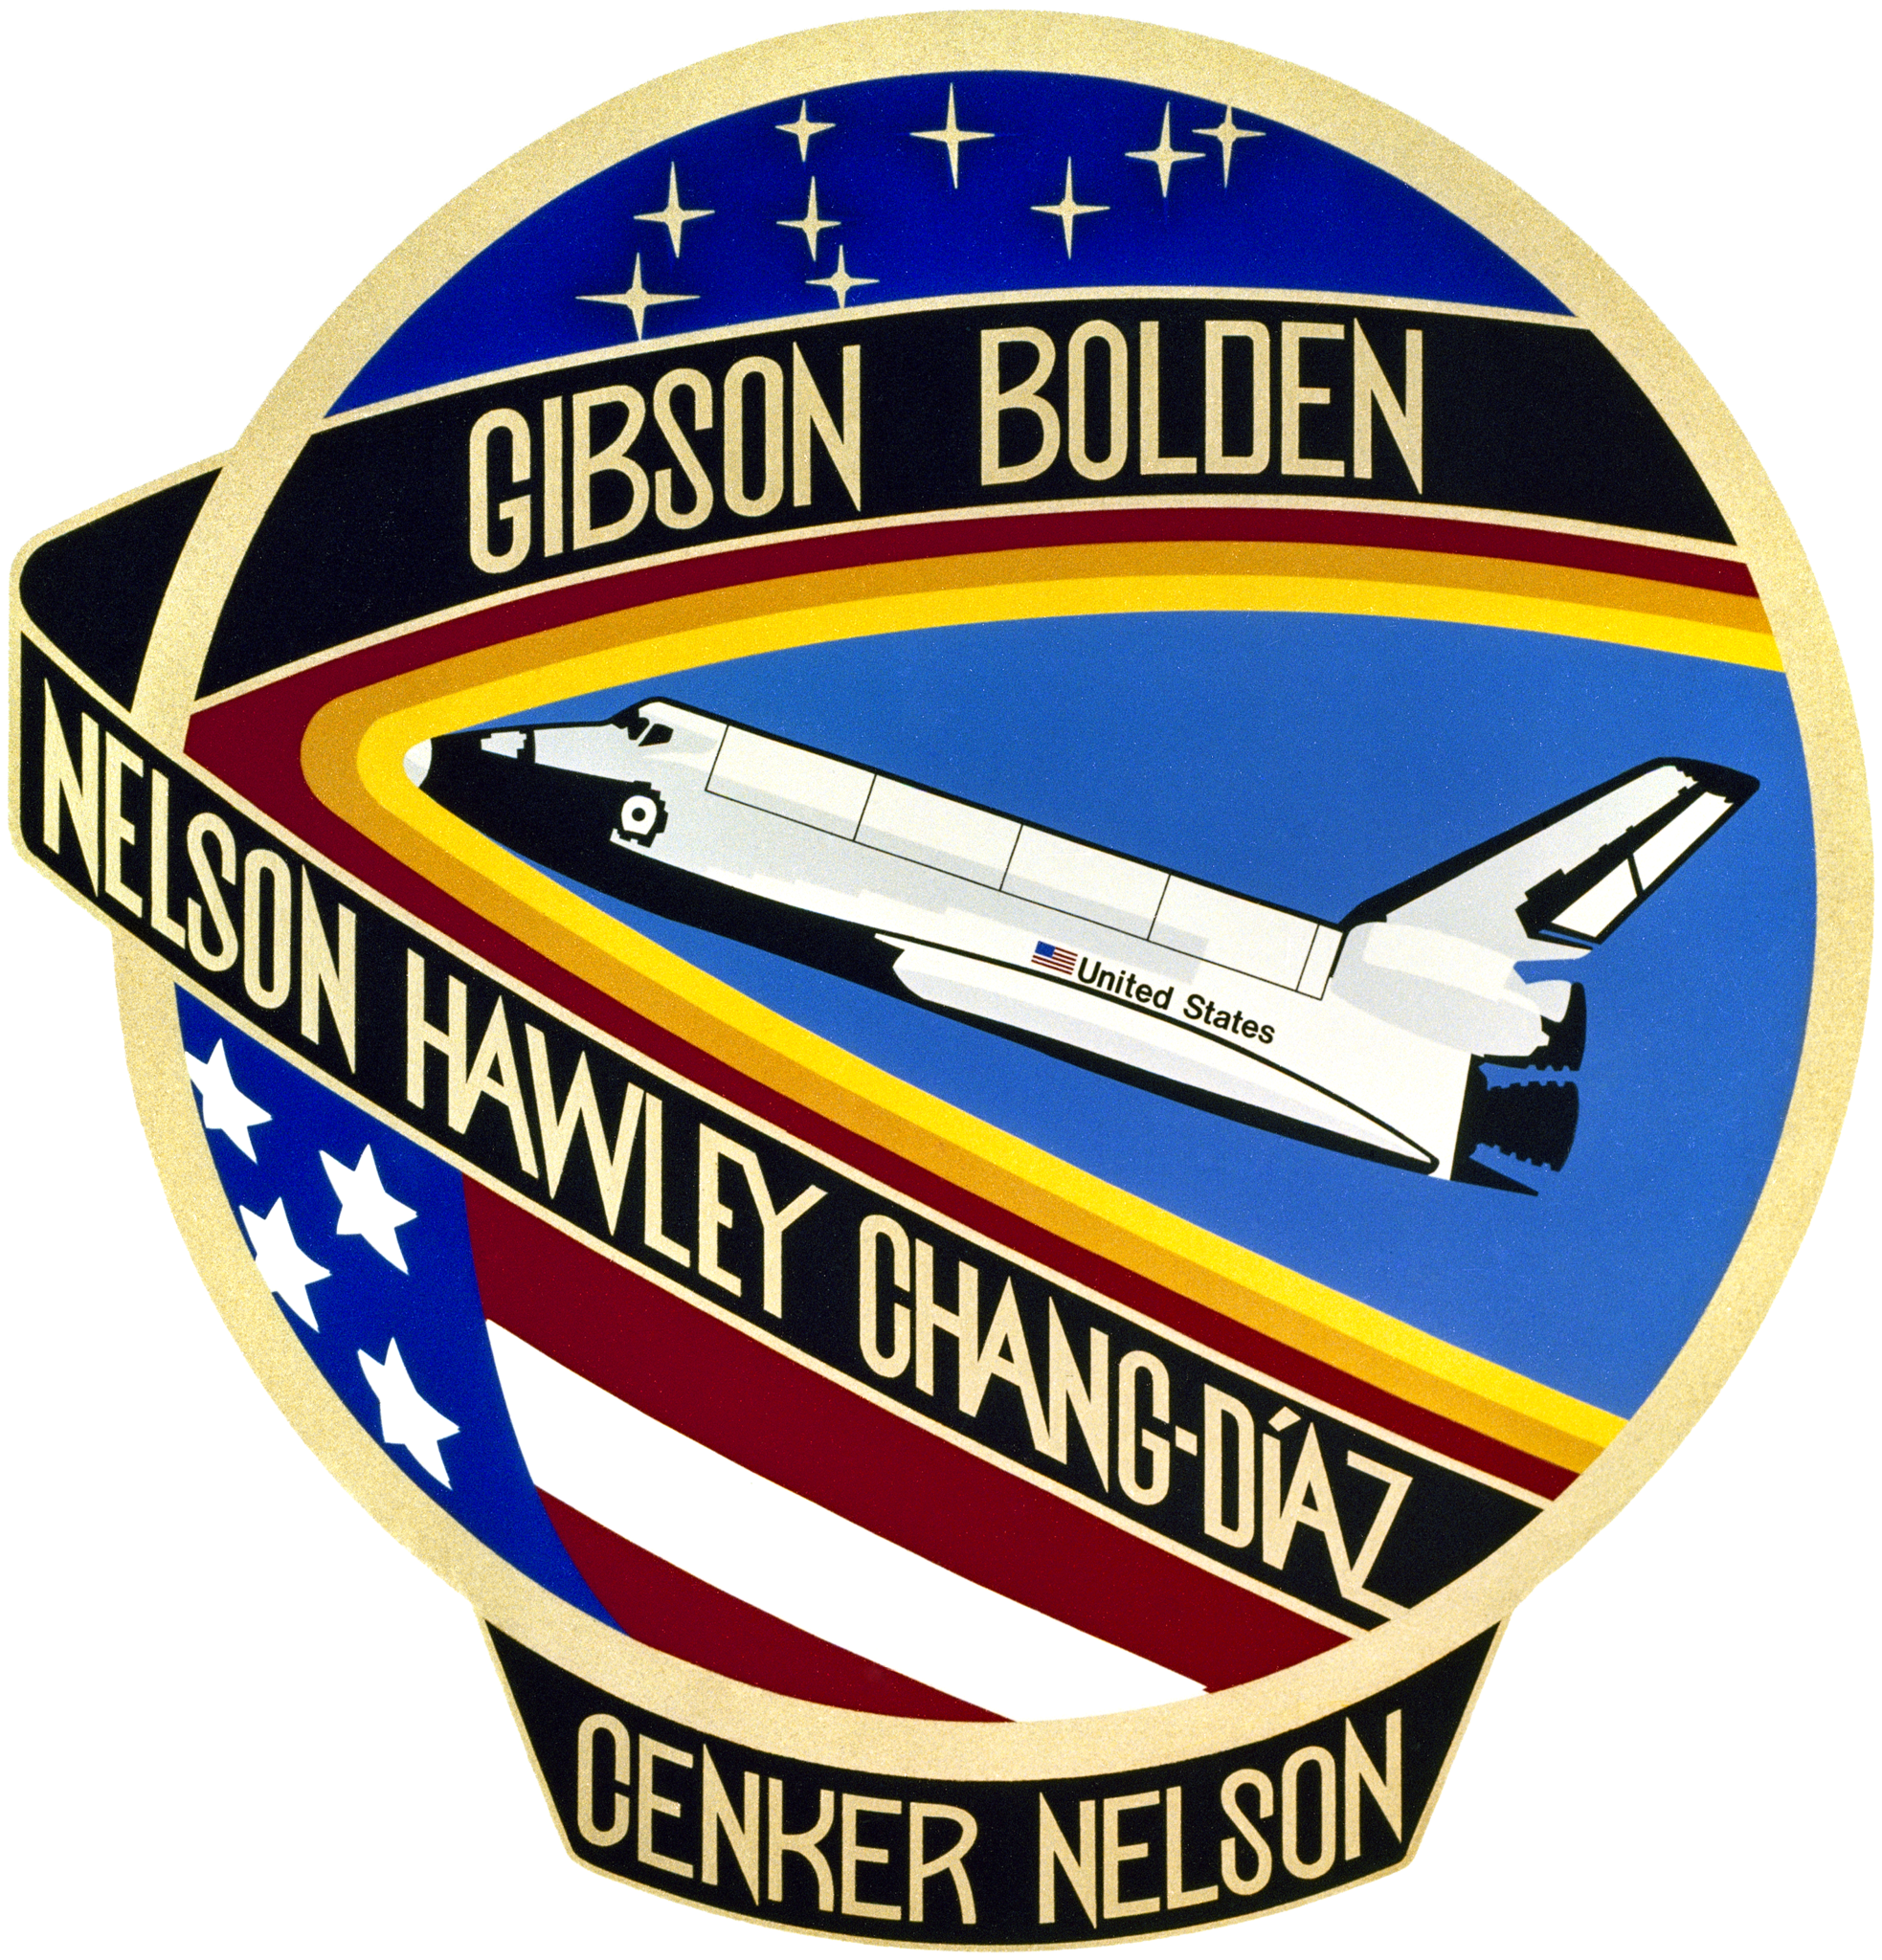 STS-61C Columbia Space Shuttle Patch Gibson Bolden Nelson Hawley Chang Diaz